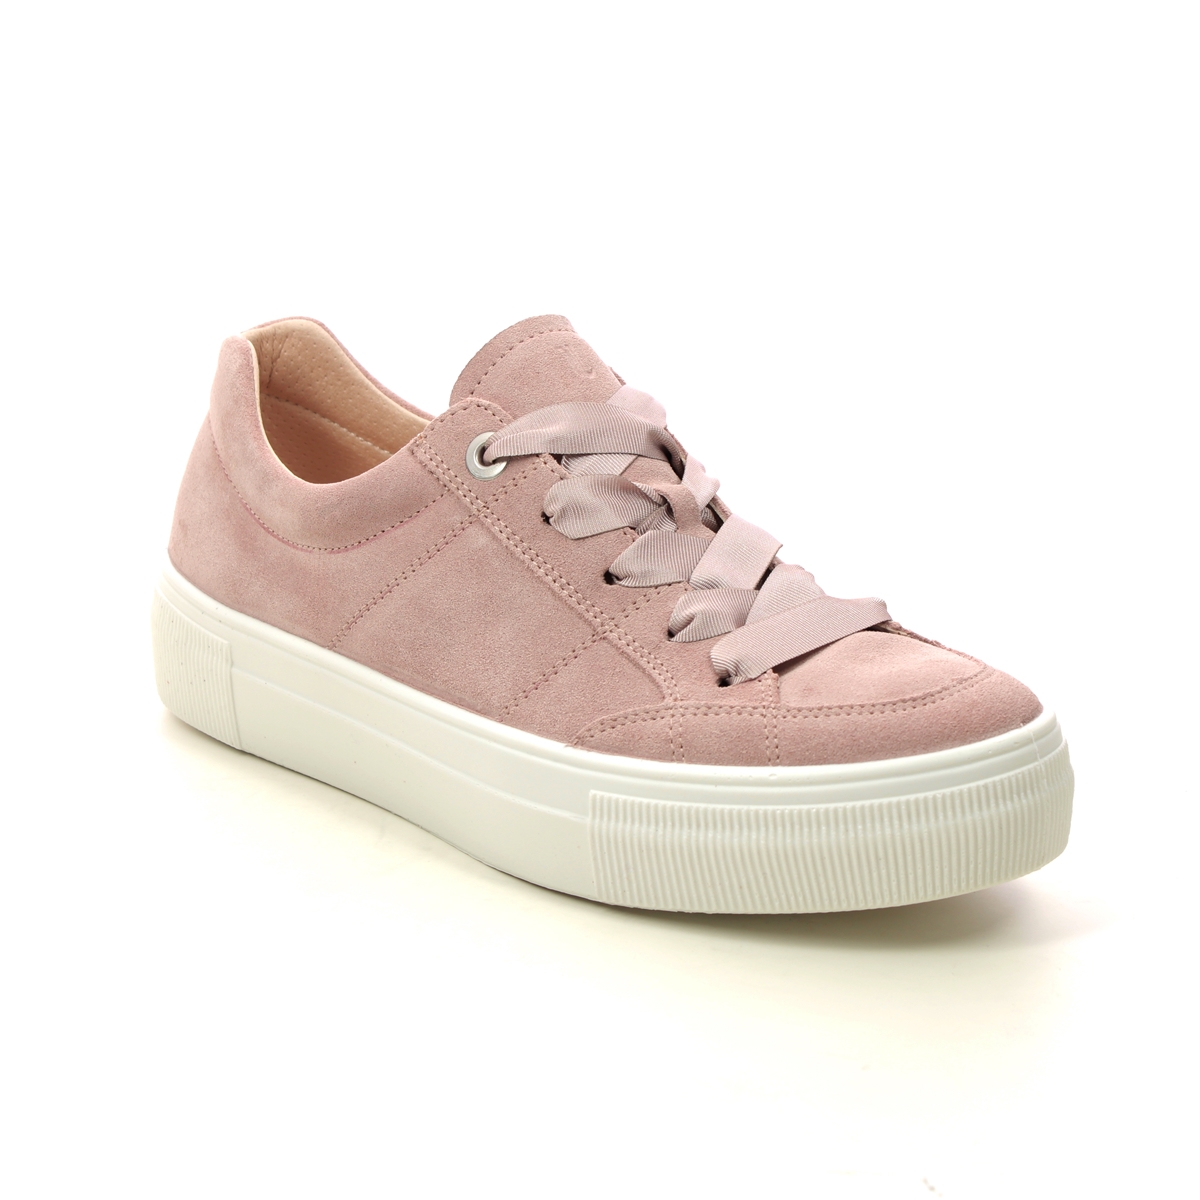 Legero Lima Stitch Pink Suede Womens Trainers 0600910-5600 In Size 38 In Plain Pink Suede